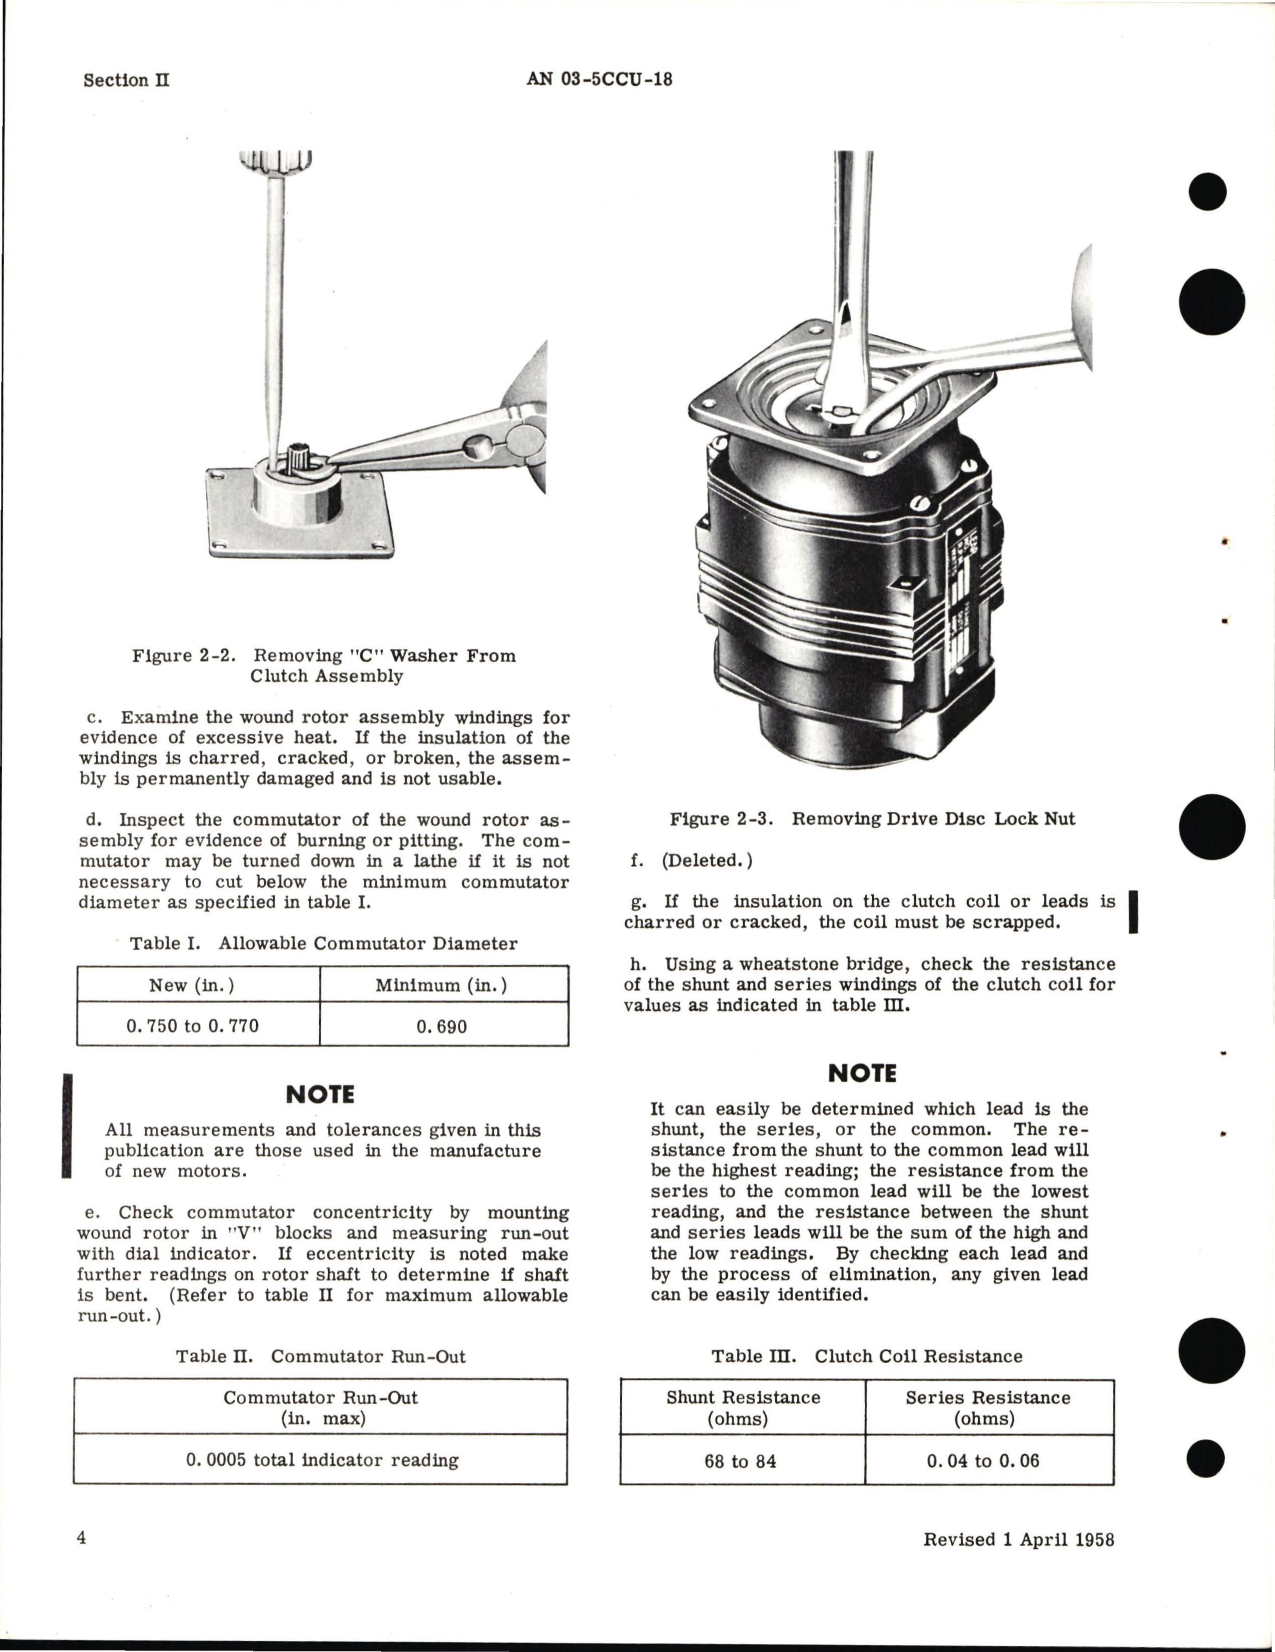 Sample page 8 from AirCorps Library document: Overhaul Instructions for Fractional Horsepower Electric Motors - C Frame Series 